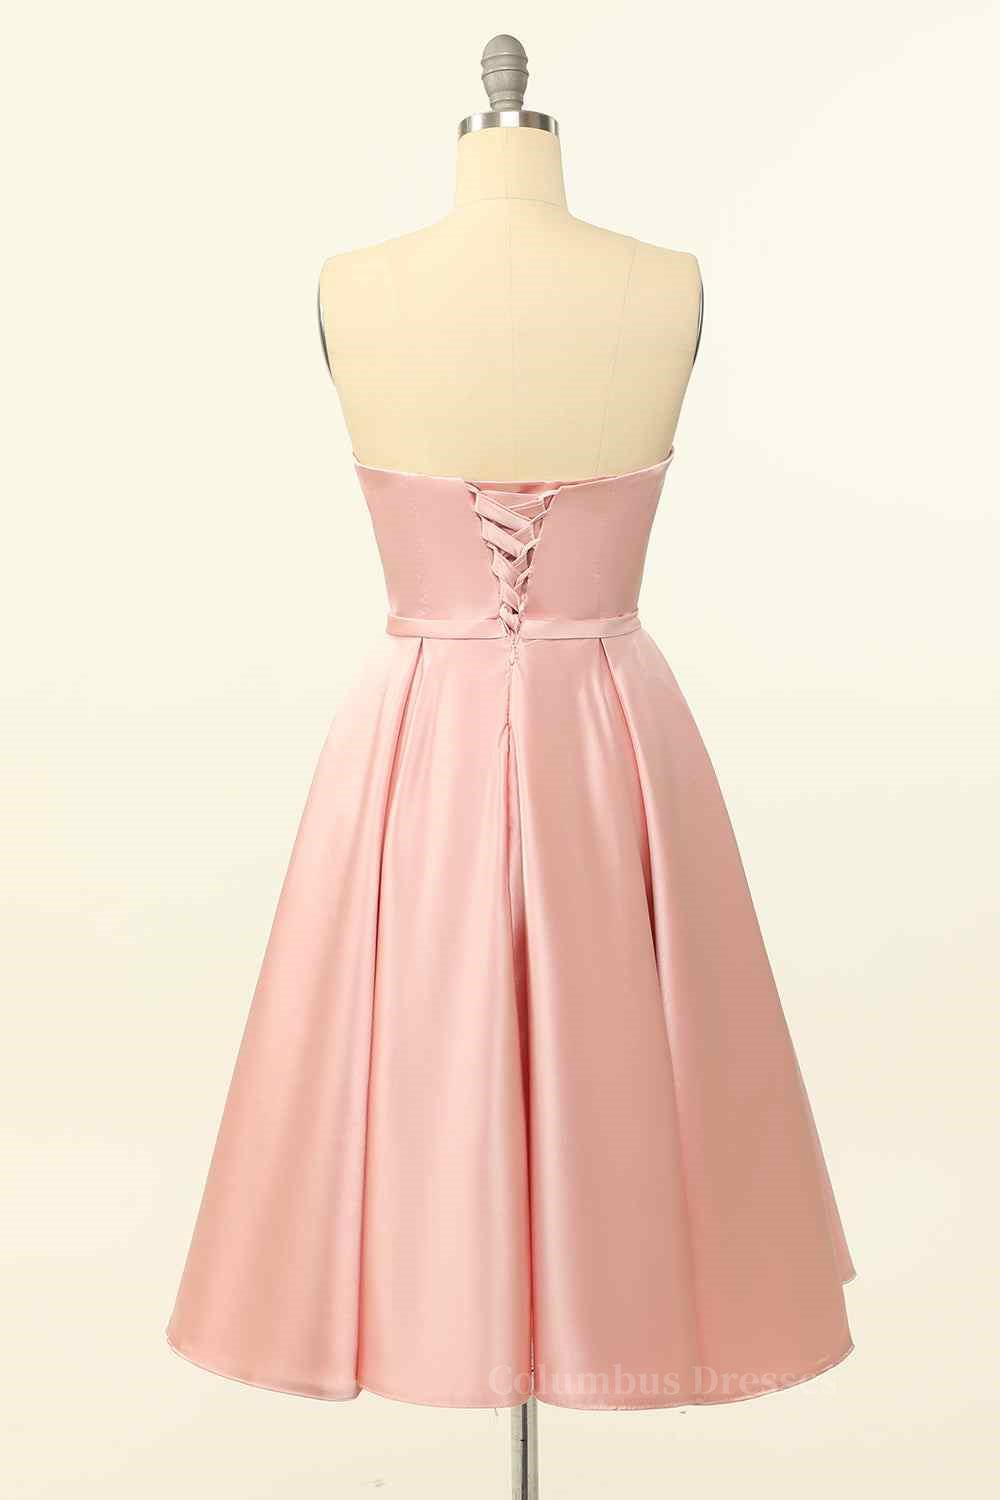 Bridesmaid Dresses Long Sleeves, Pink A-line Strapless Satin Lace-Up Back Mini Homecoming Dress